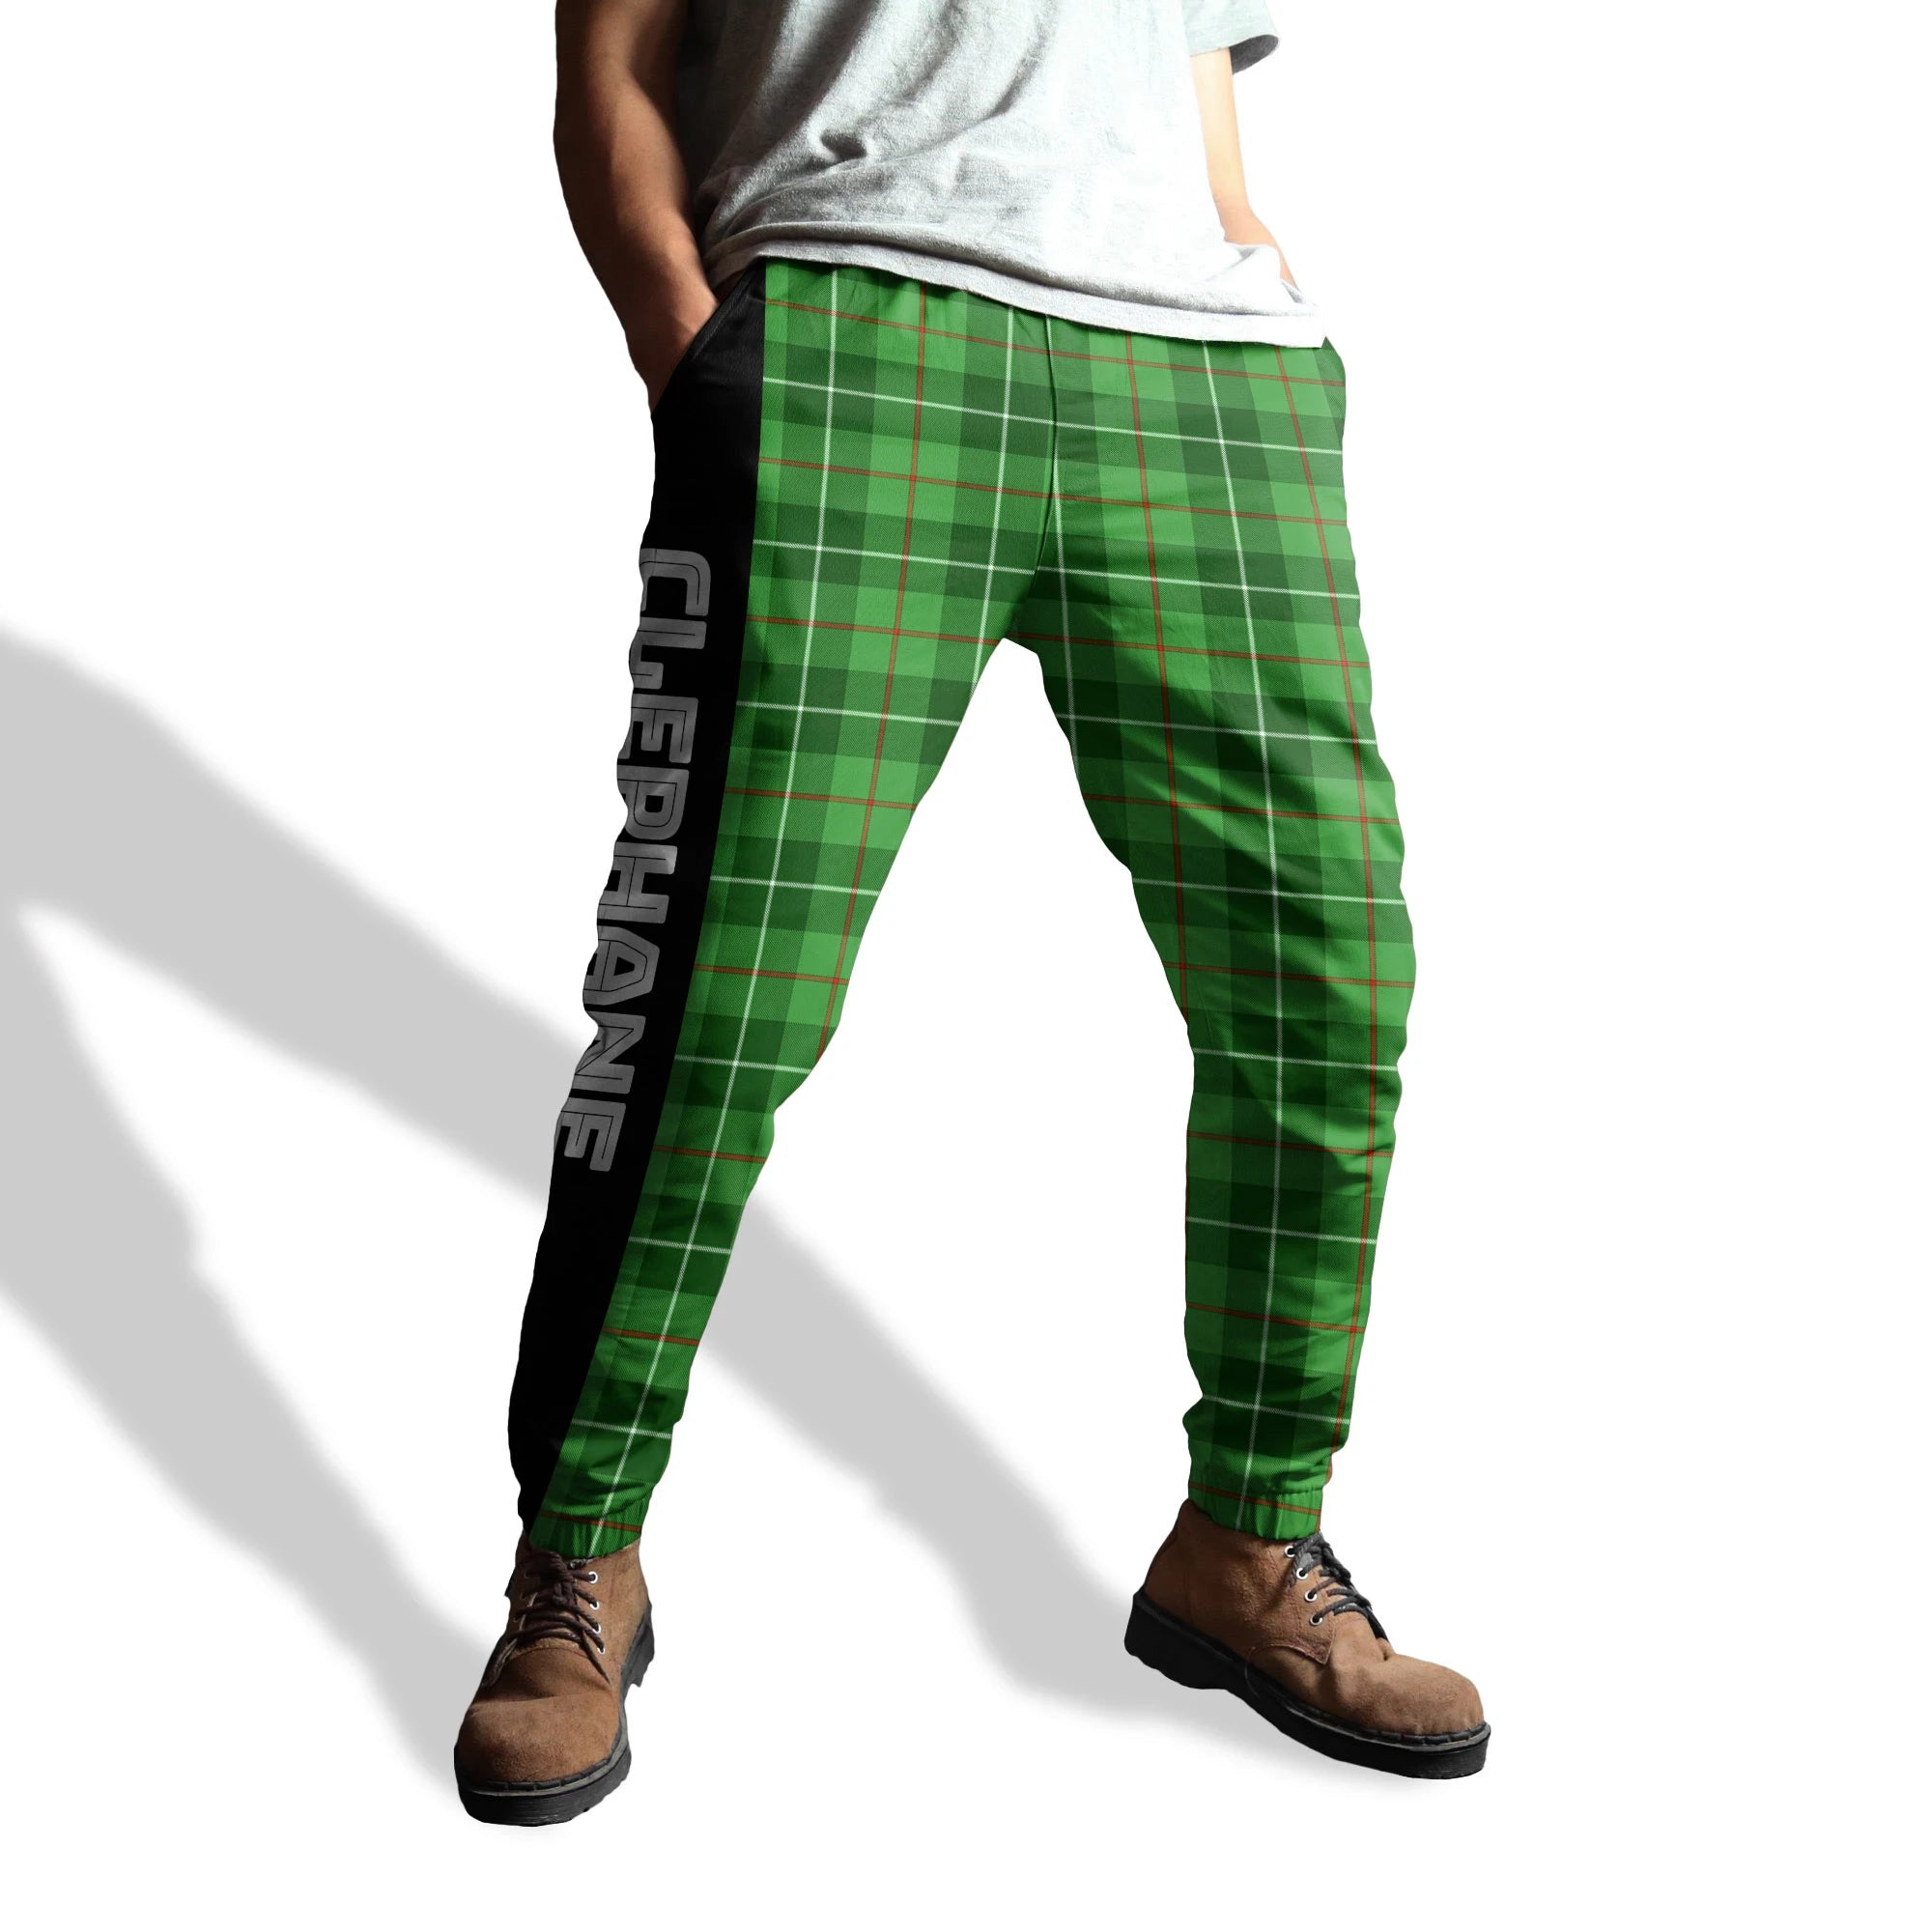 Clephane (or Clephan) Tartan Sweatpants All Over Print Style